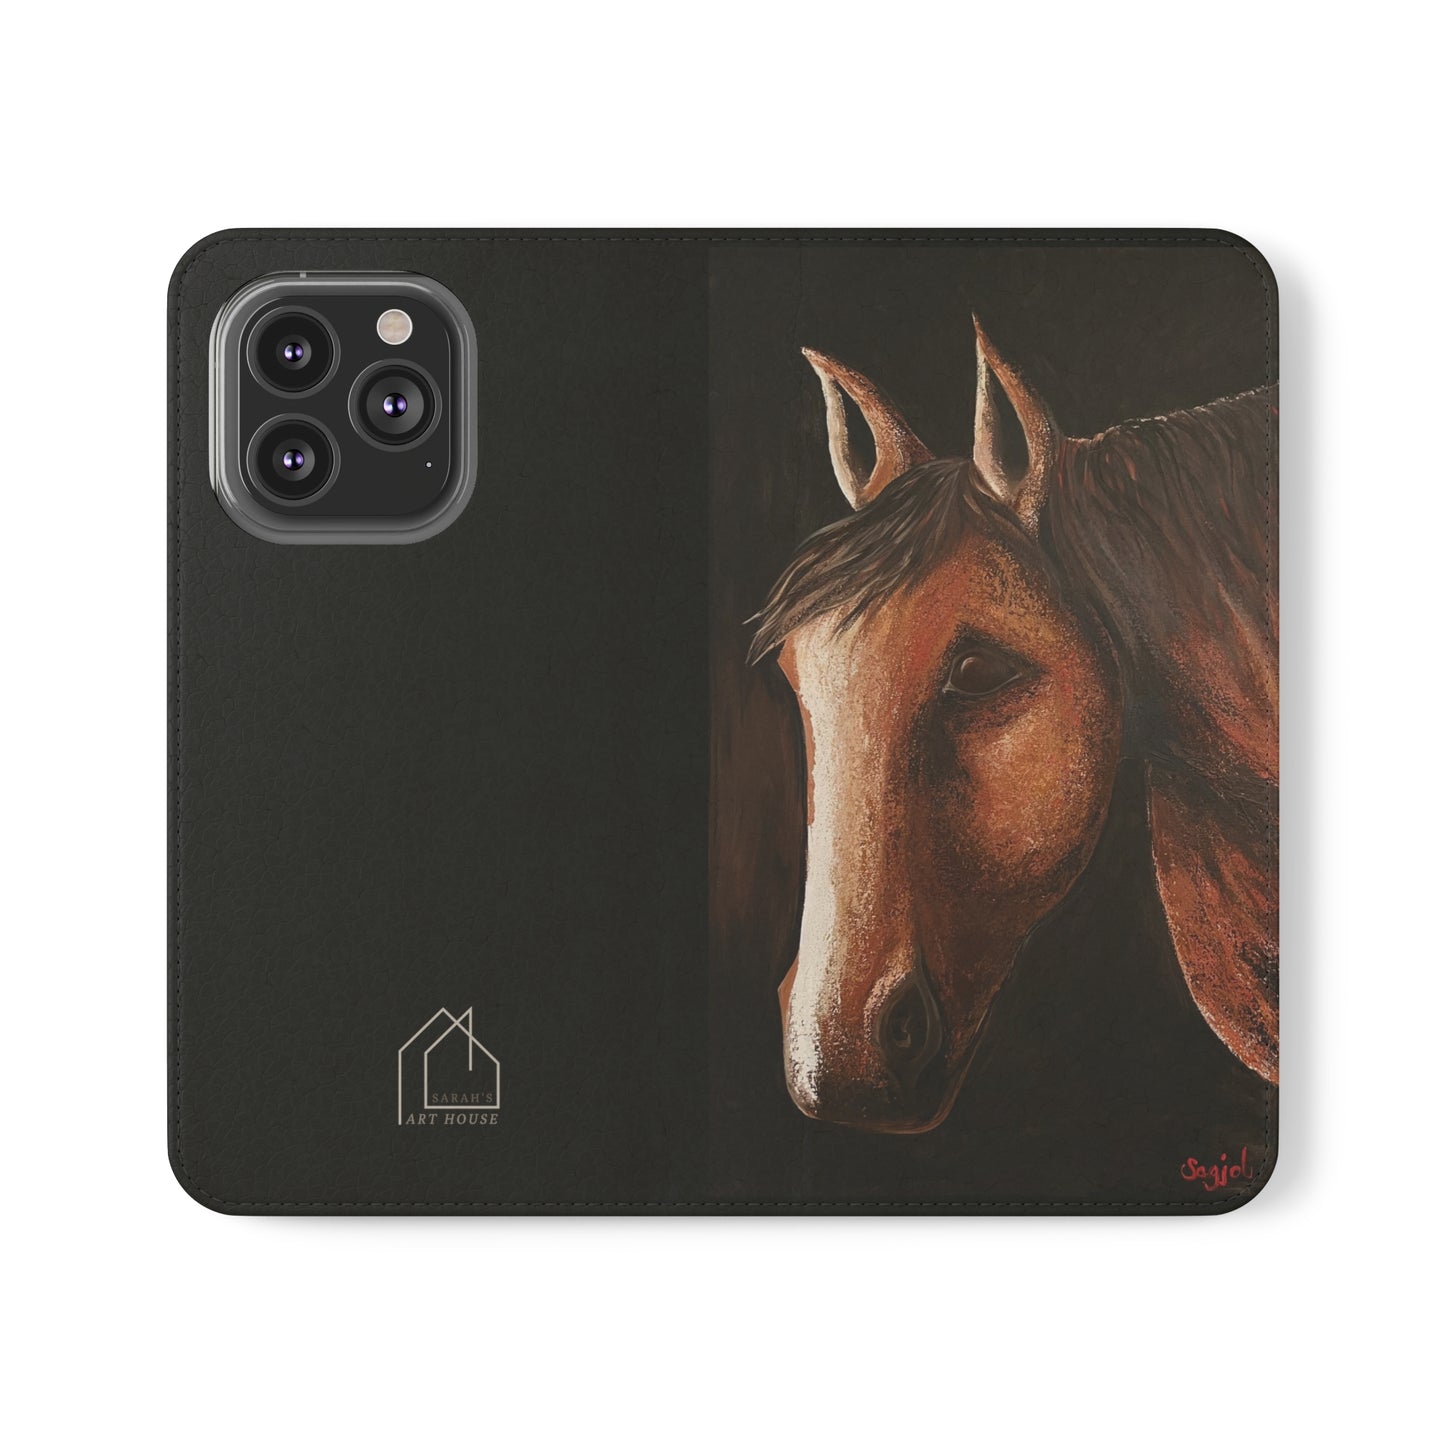 Phone Flip Cases - Wallet Phone case - Phone case with Wallet - Equestrian - Spirit